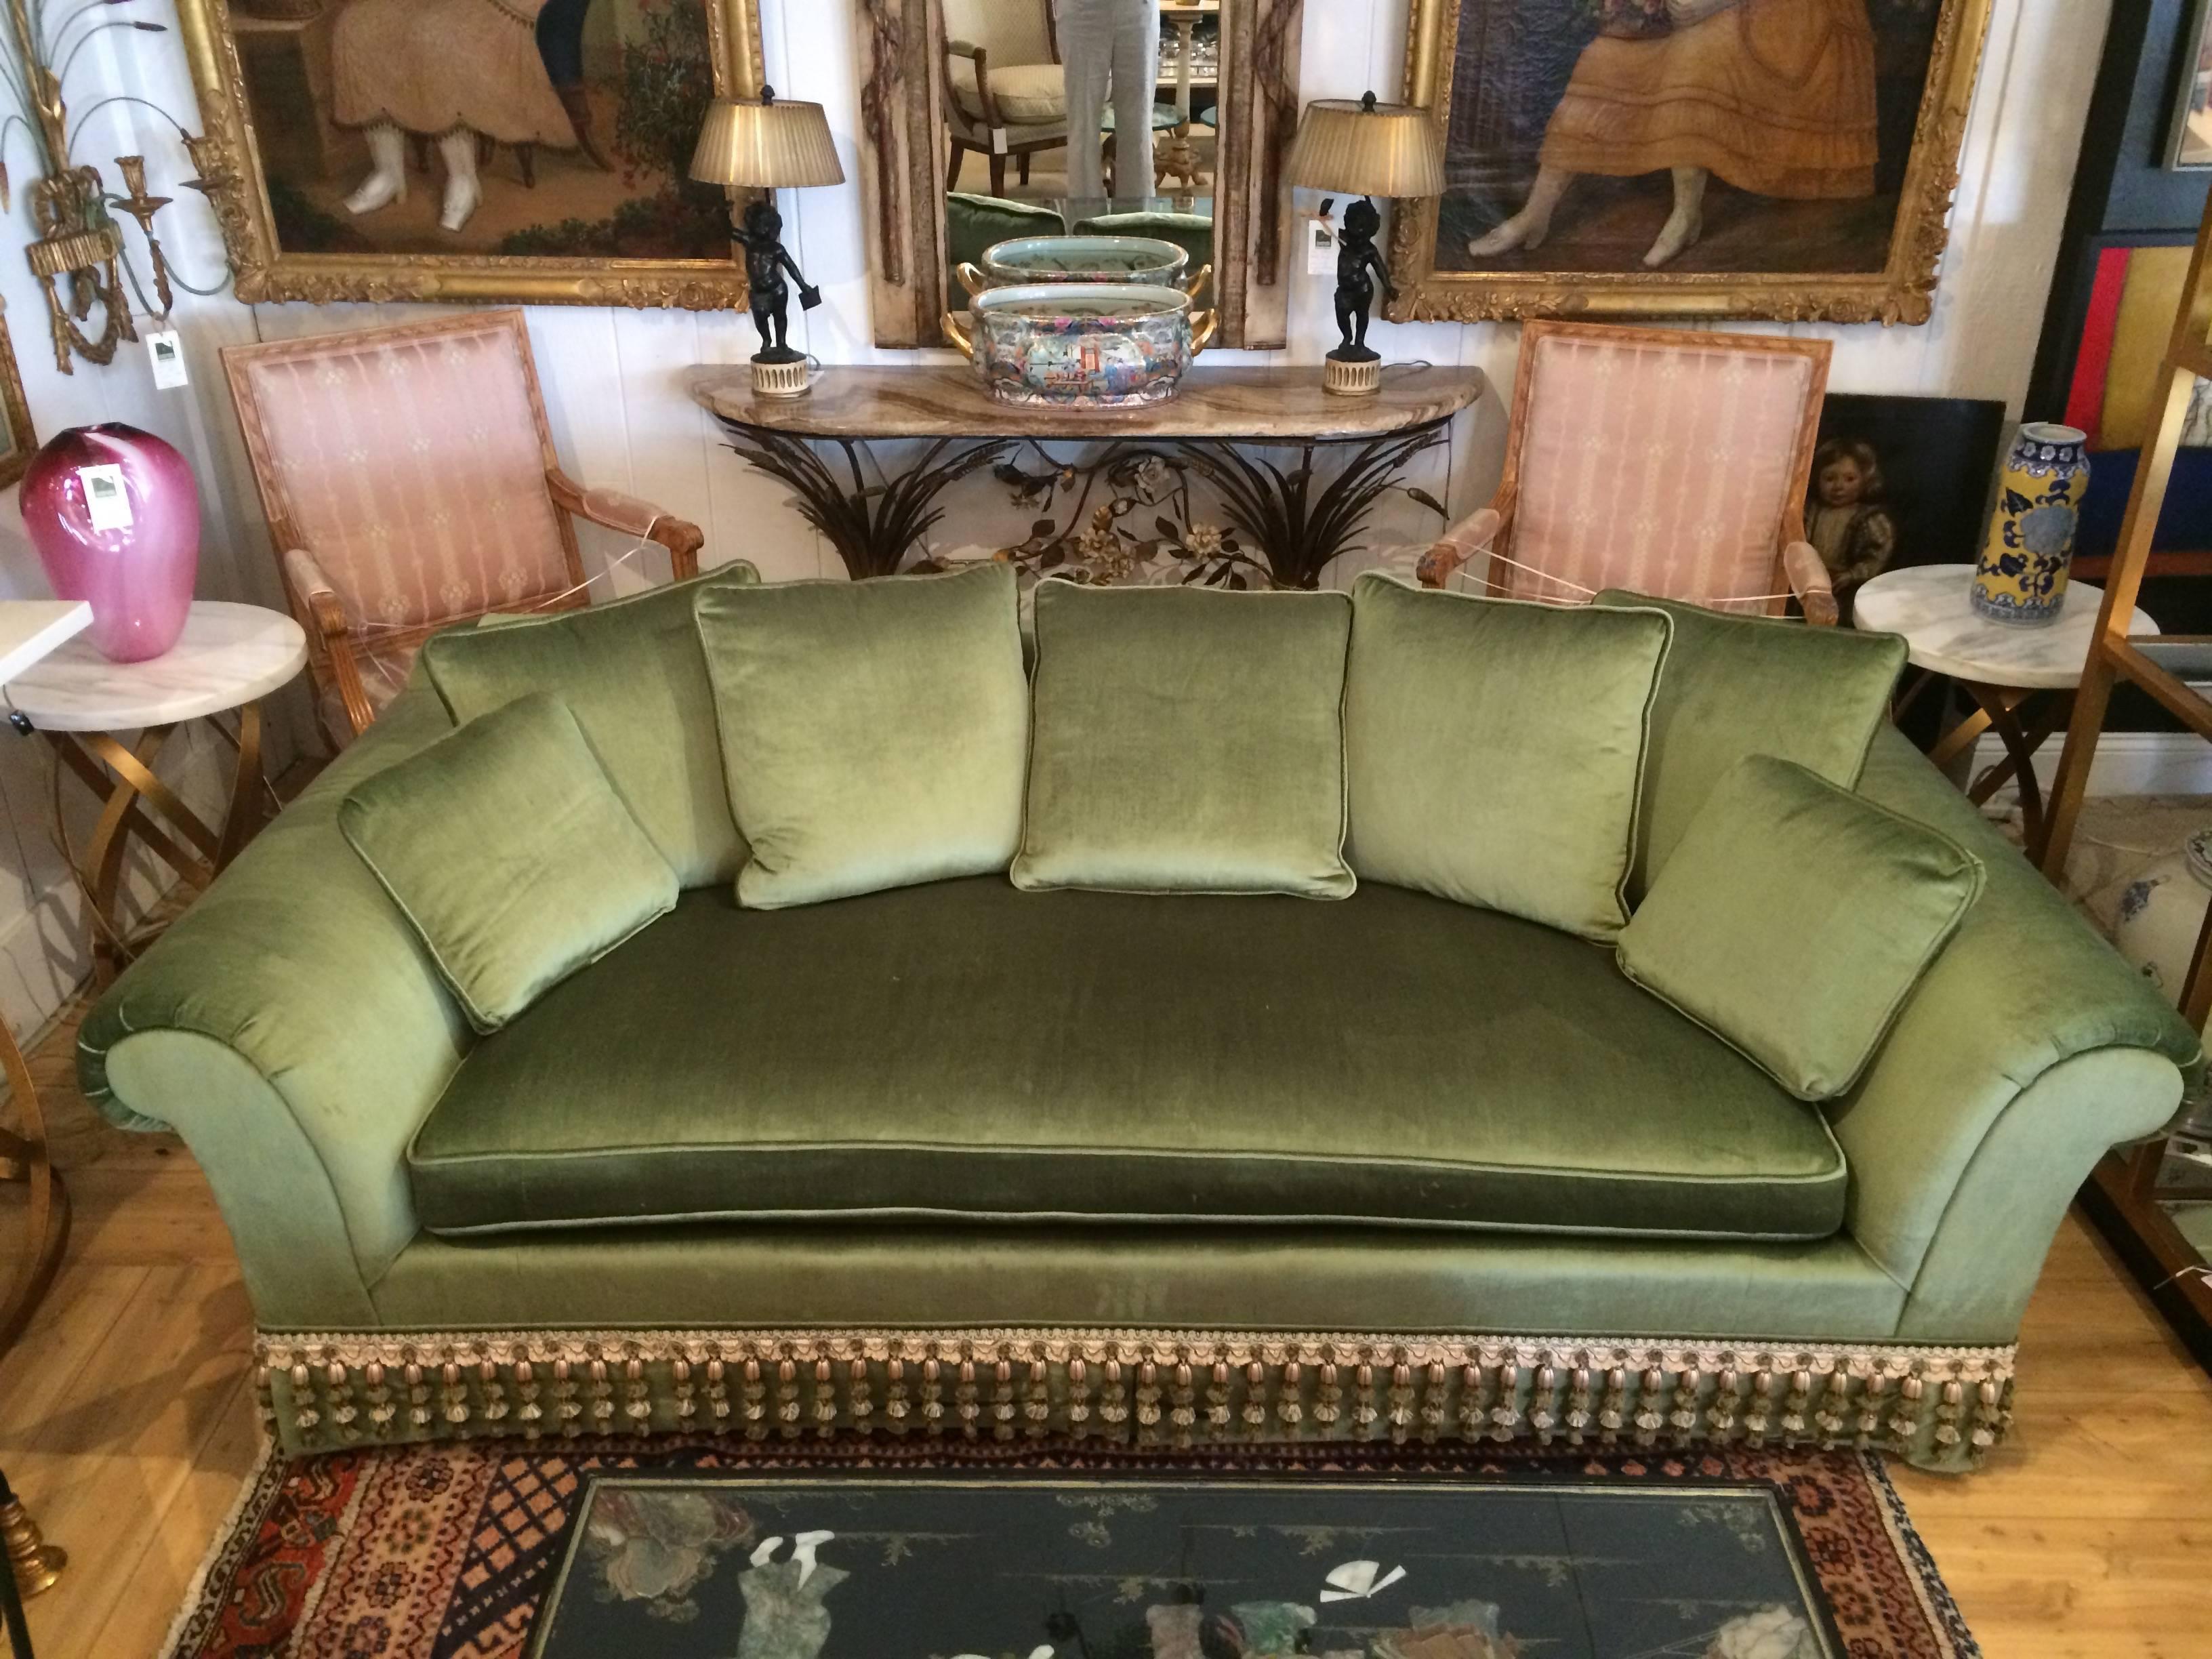 Sublime luxurious custom velvet sofa upholstered in a soft sage green velvet from France and trimmed with with exquisite elaborate bullion fringe. Cushion is feather wrapped foam.
Sseat depth 26.5.